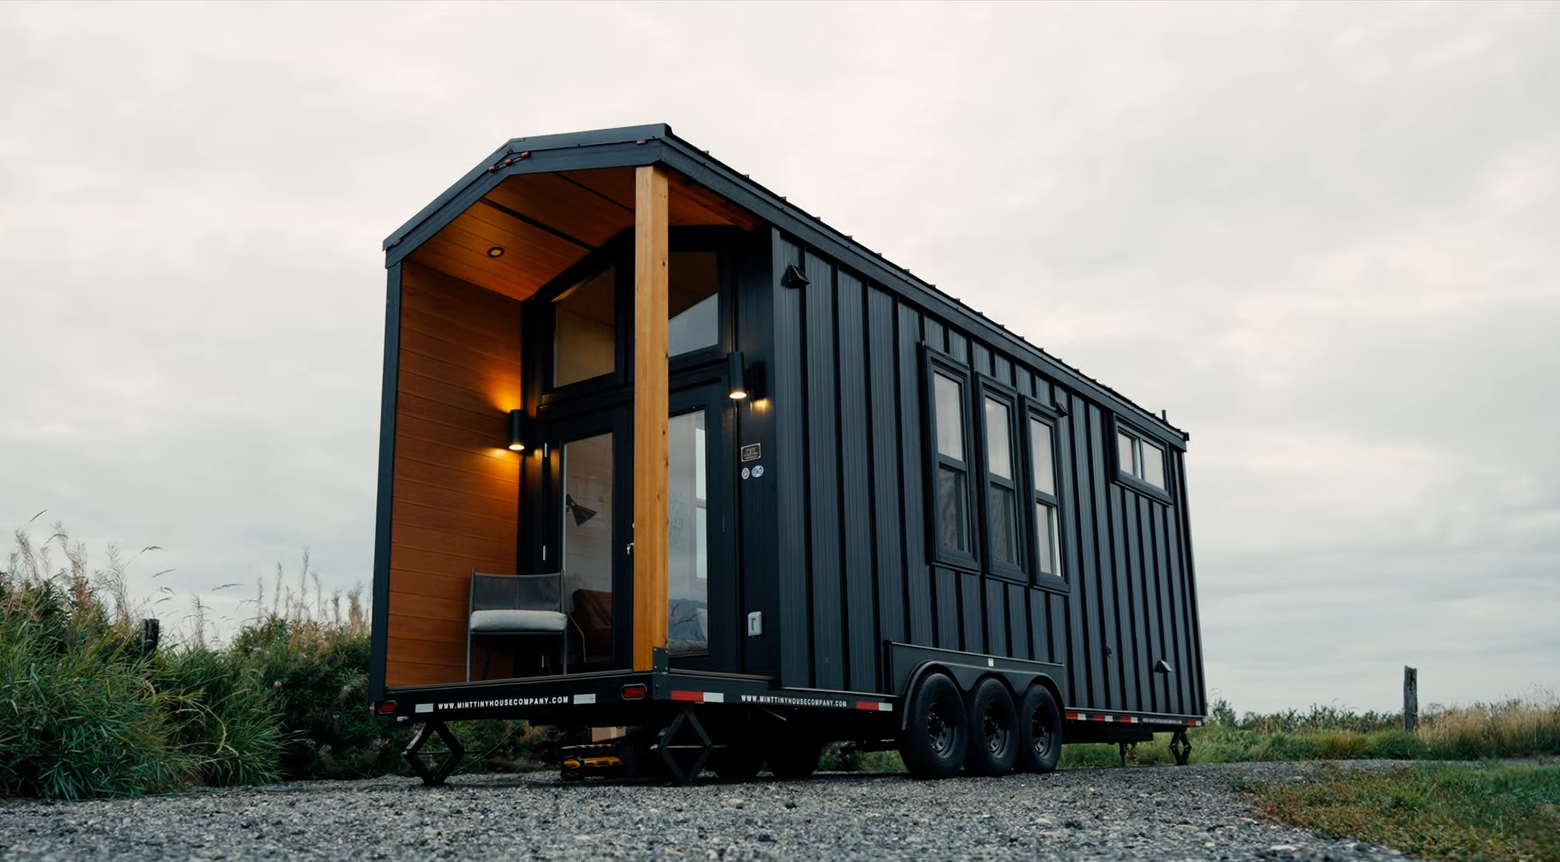 30 ft. Onyx 2630 Tiny House: Available Now! [Video]